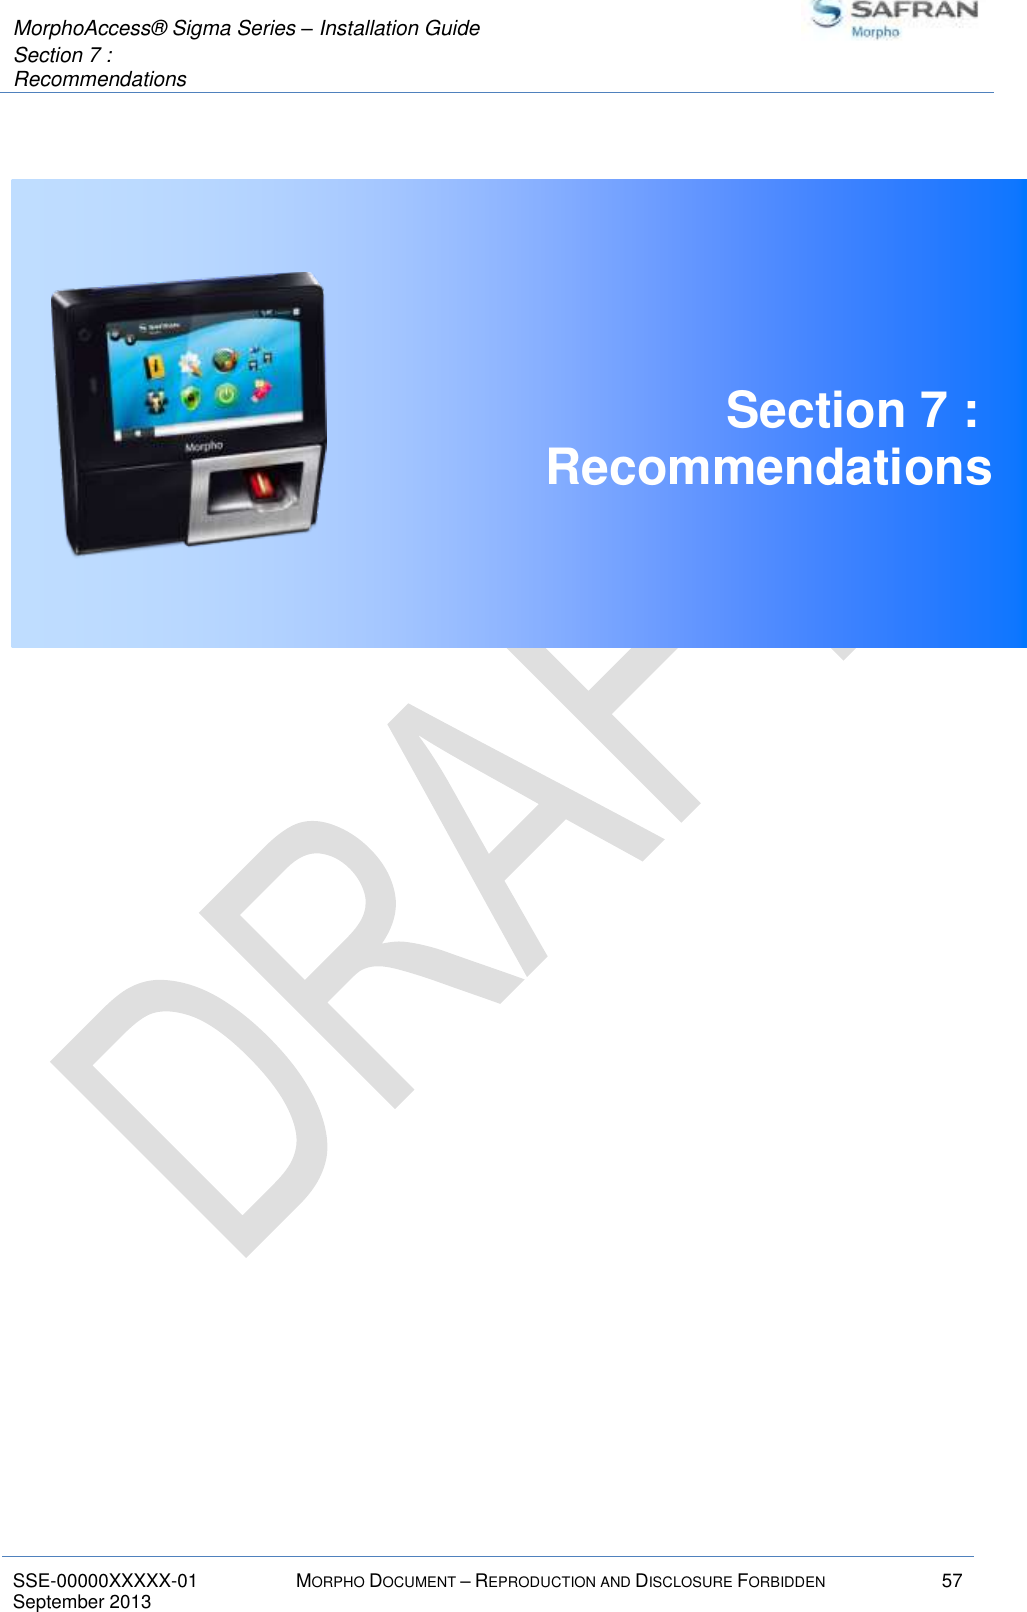  MorphoAccess® Sigma Series – Installation Guide  Section 7 :  Recommendations   SSE-00000XXXXX-01 MORPHO DOCUMENT – REPRODUCTION AND DISCLOSURE FORBIDDEN 57 September 2013     Section 7 :  Recommendations     